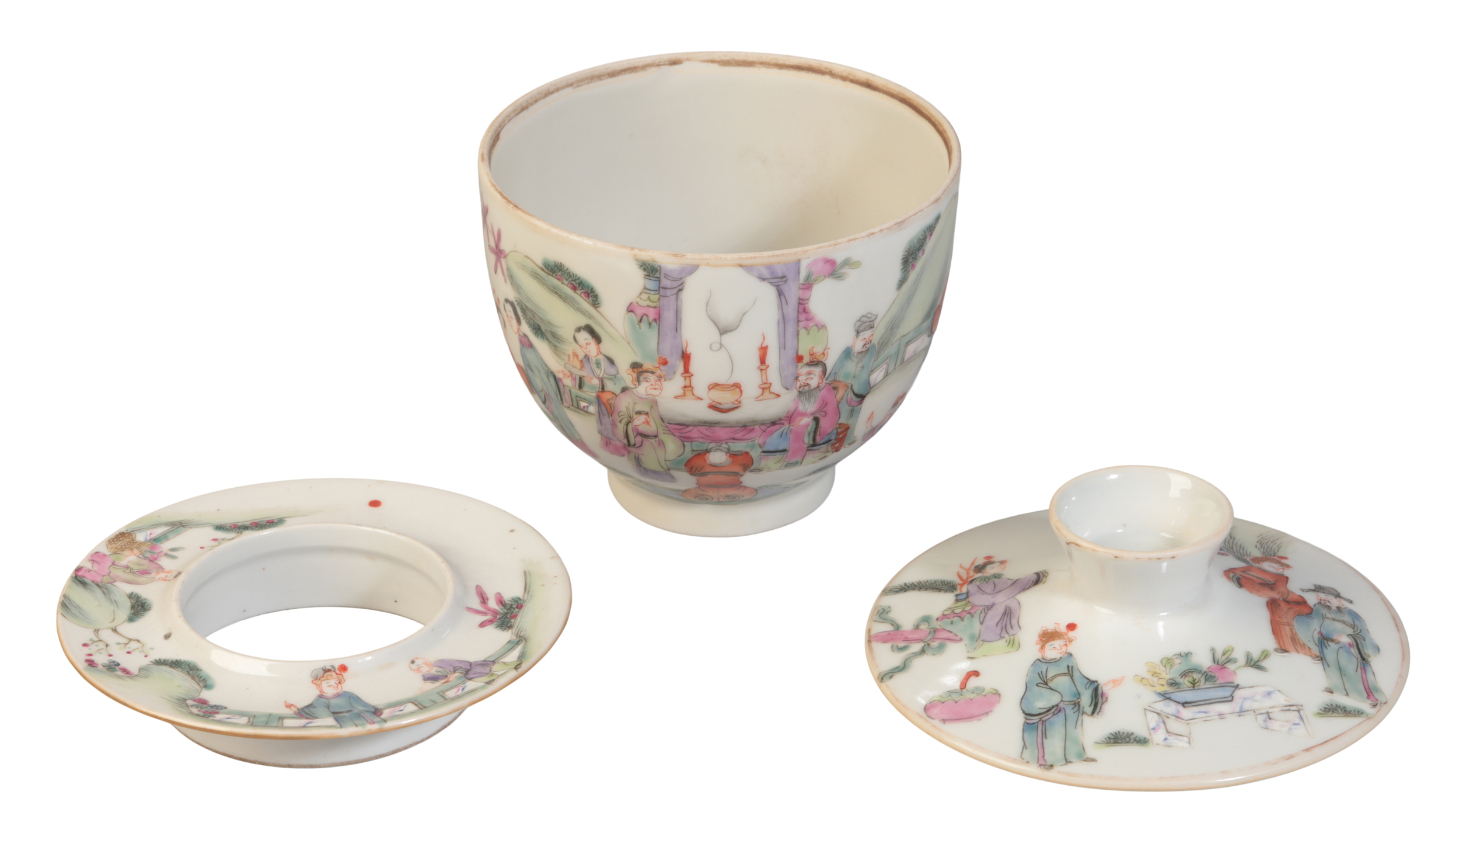 A CHINESE FAMILLE ROSE GAIWAN TEA BOWL, COVER AND STAND - Image 2 of 3